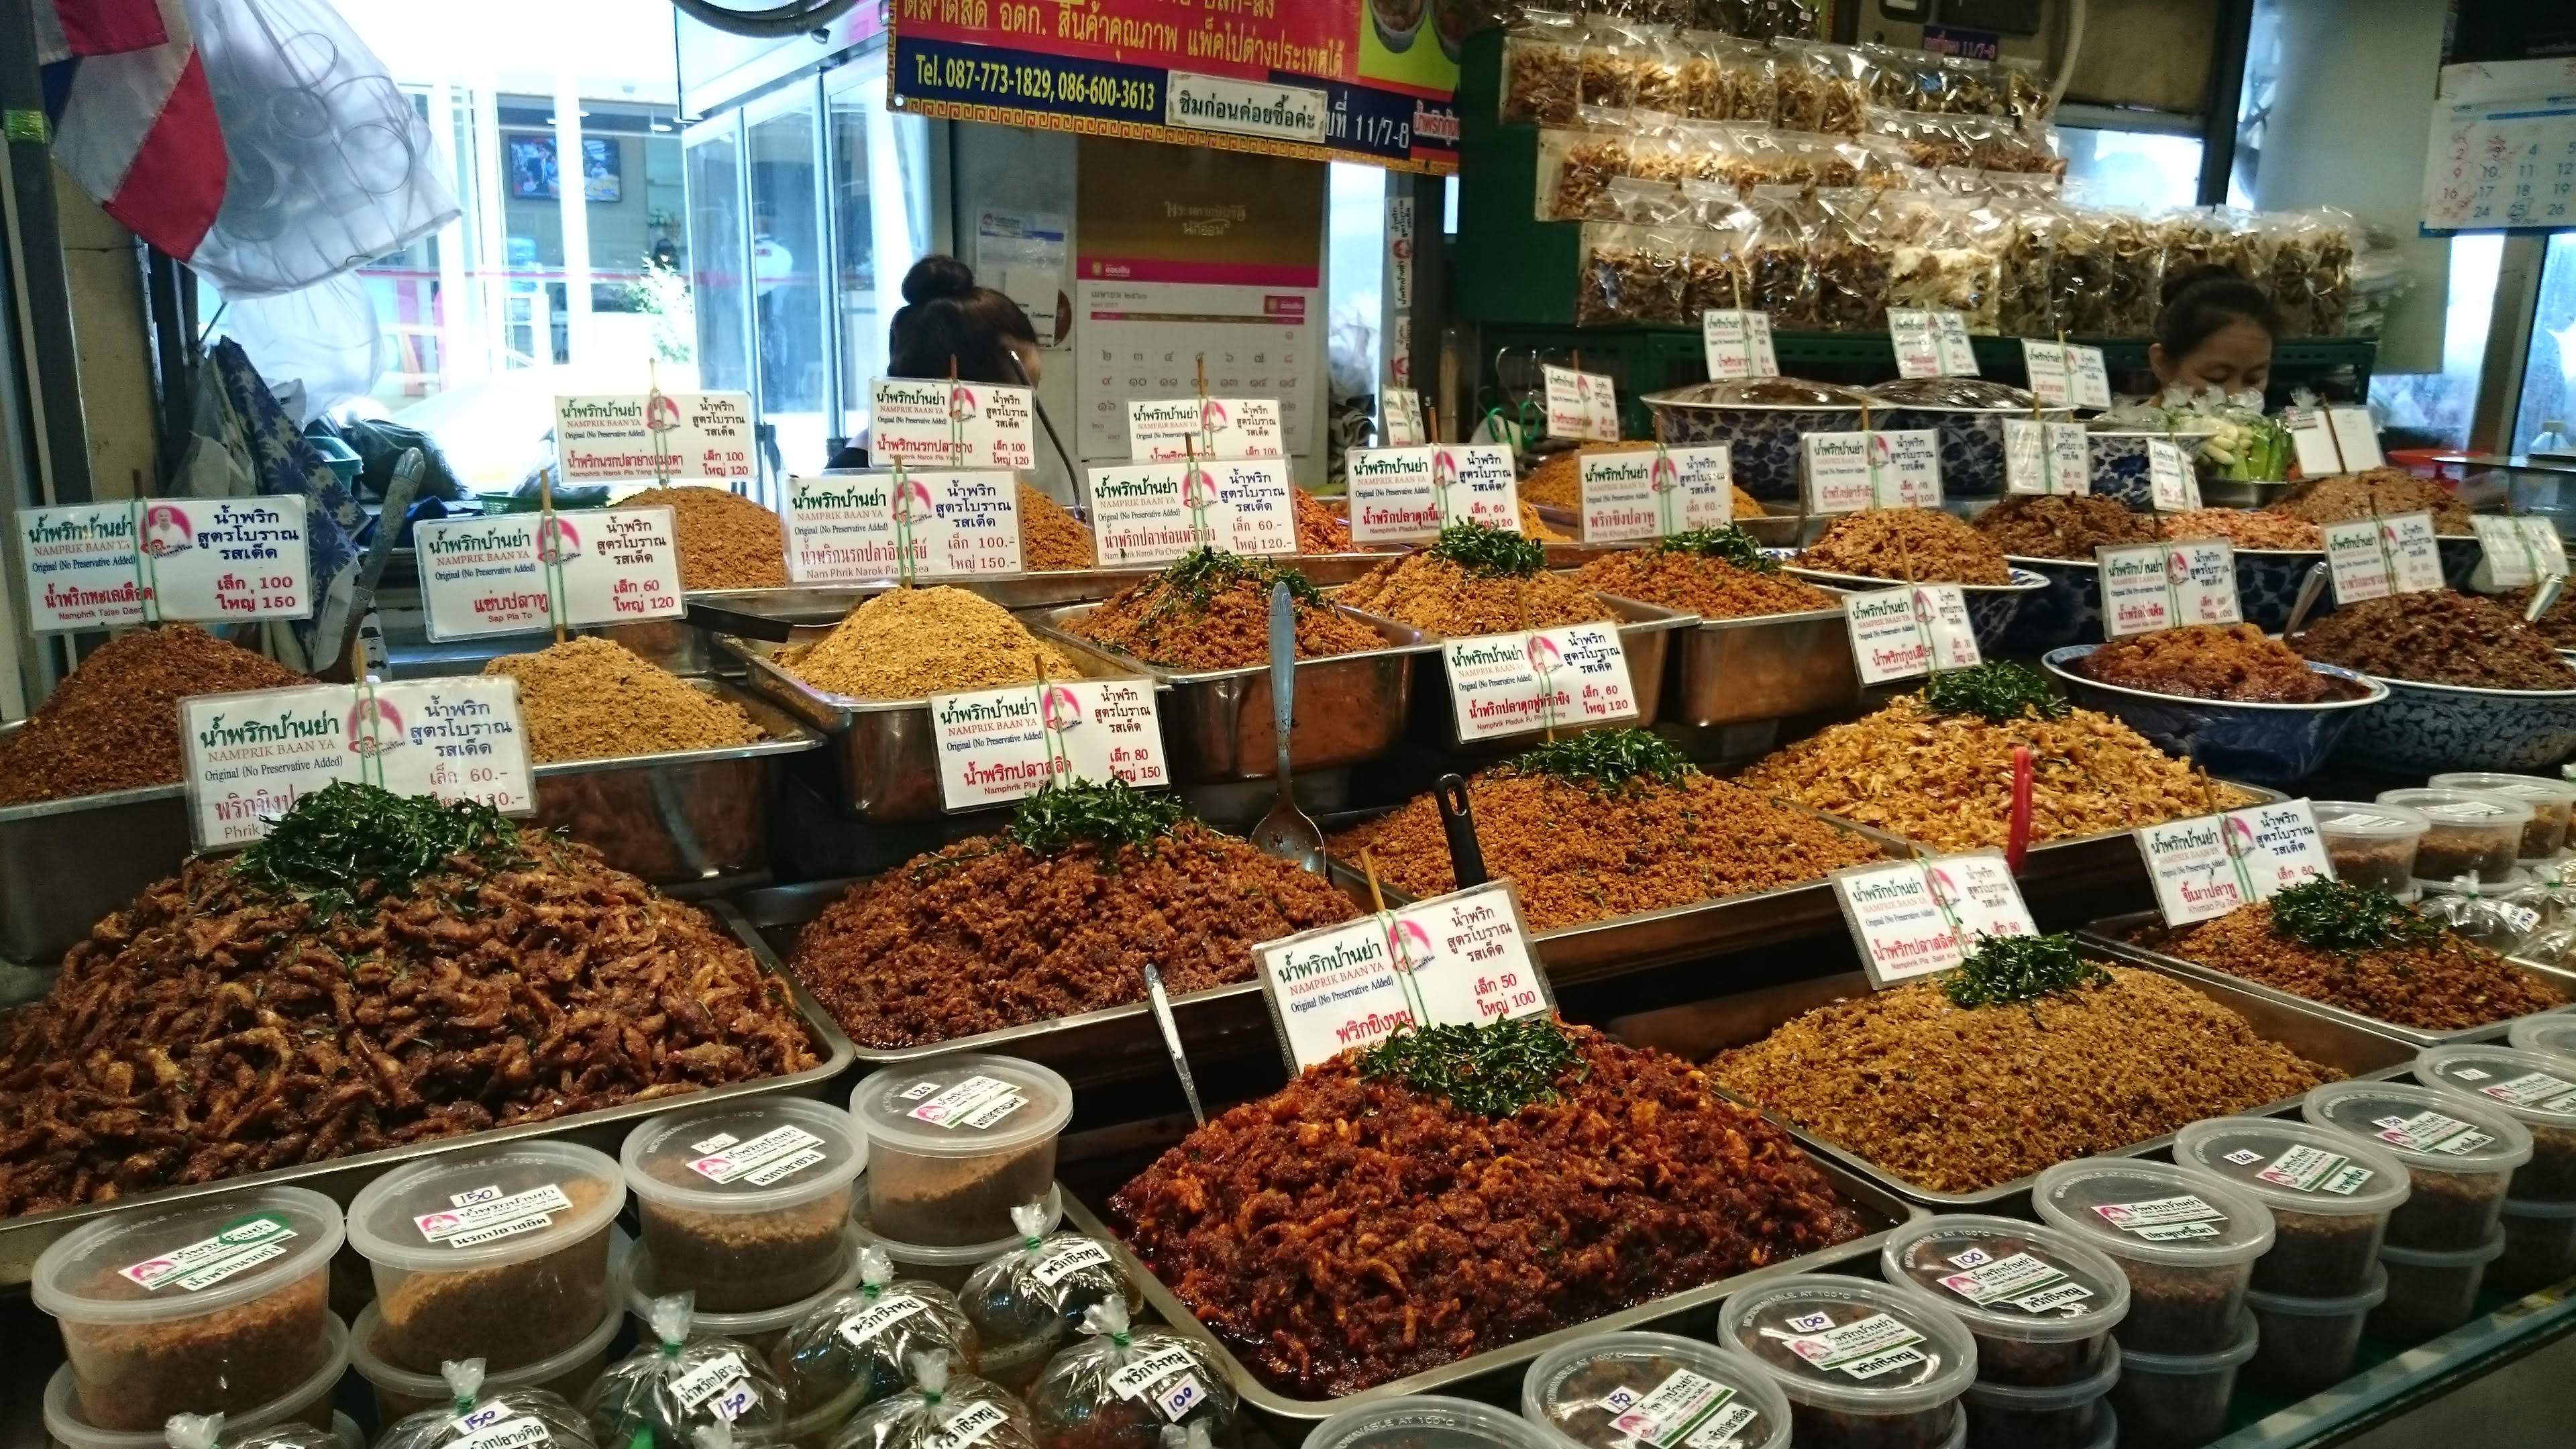 A food market in Thailand